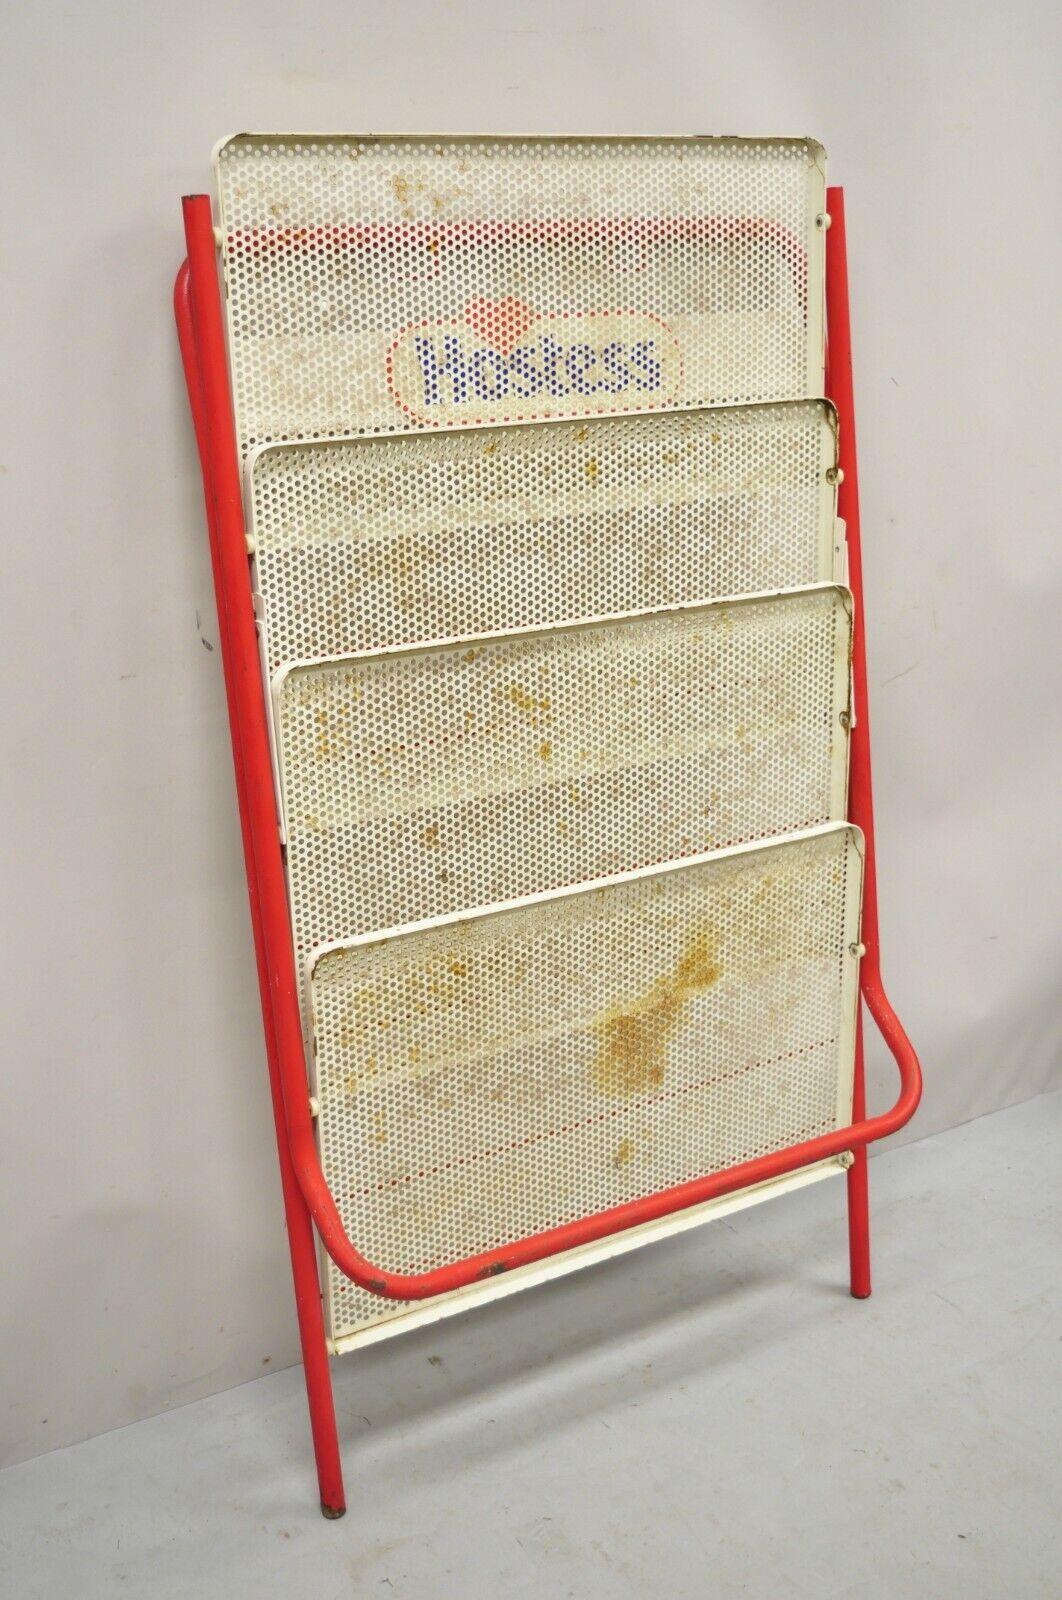 Vintage Hostess Red Metal Perforated 4 Shelf Folding Display Shelf Stand For Sale 3